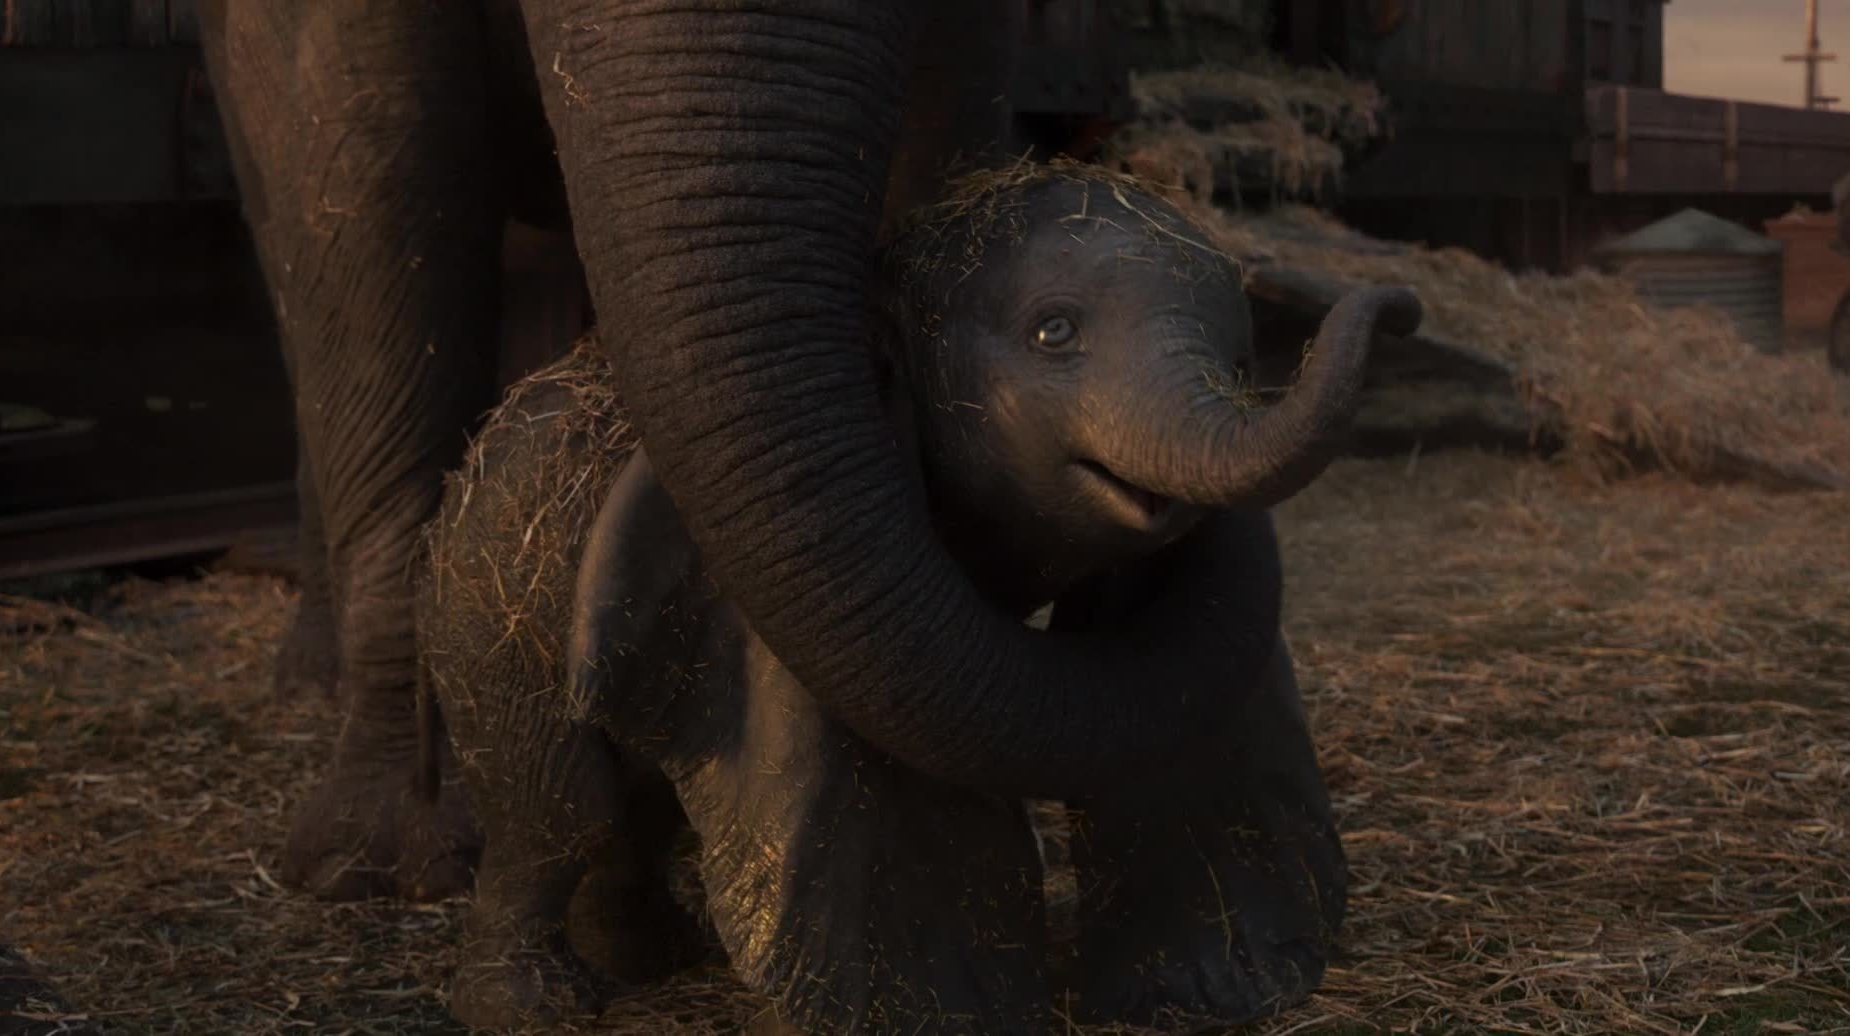 Dumbo | In Theaters March 29